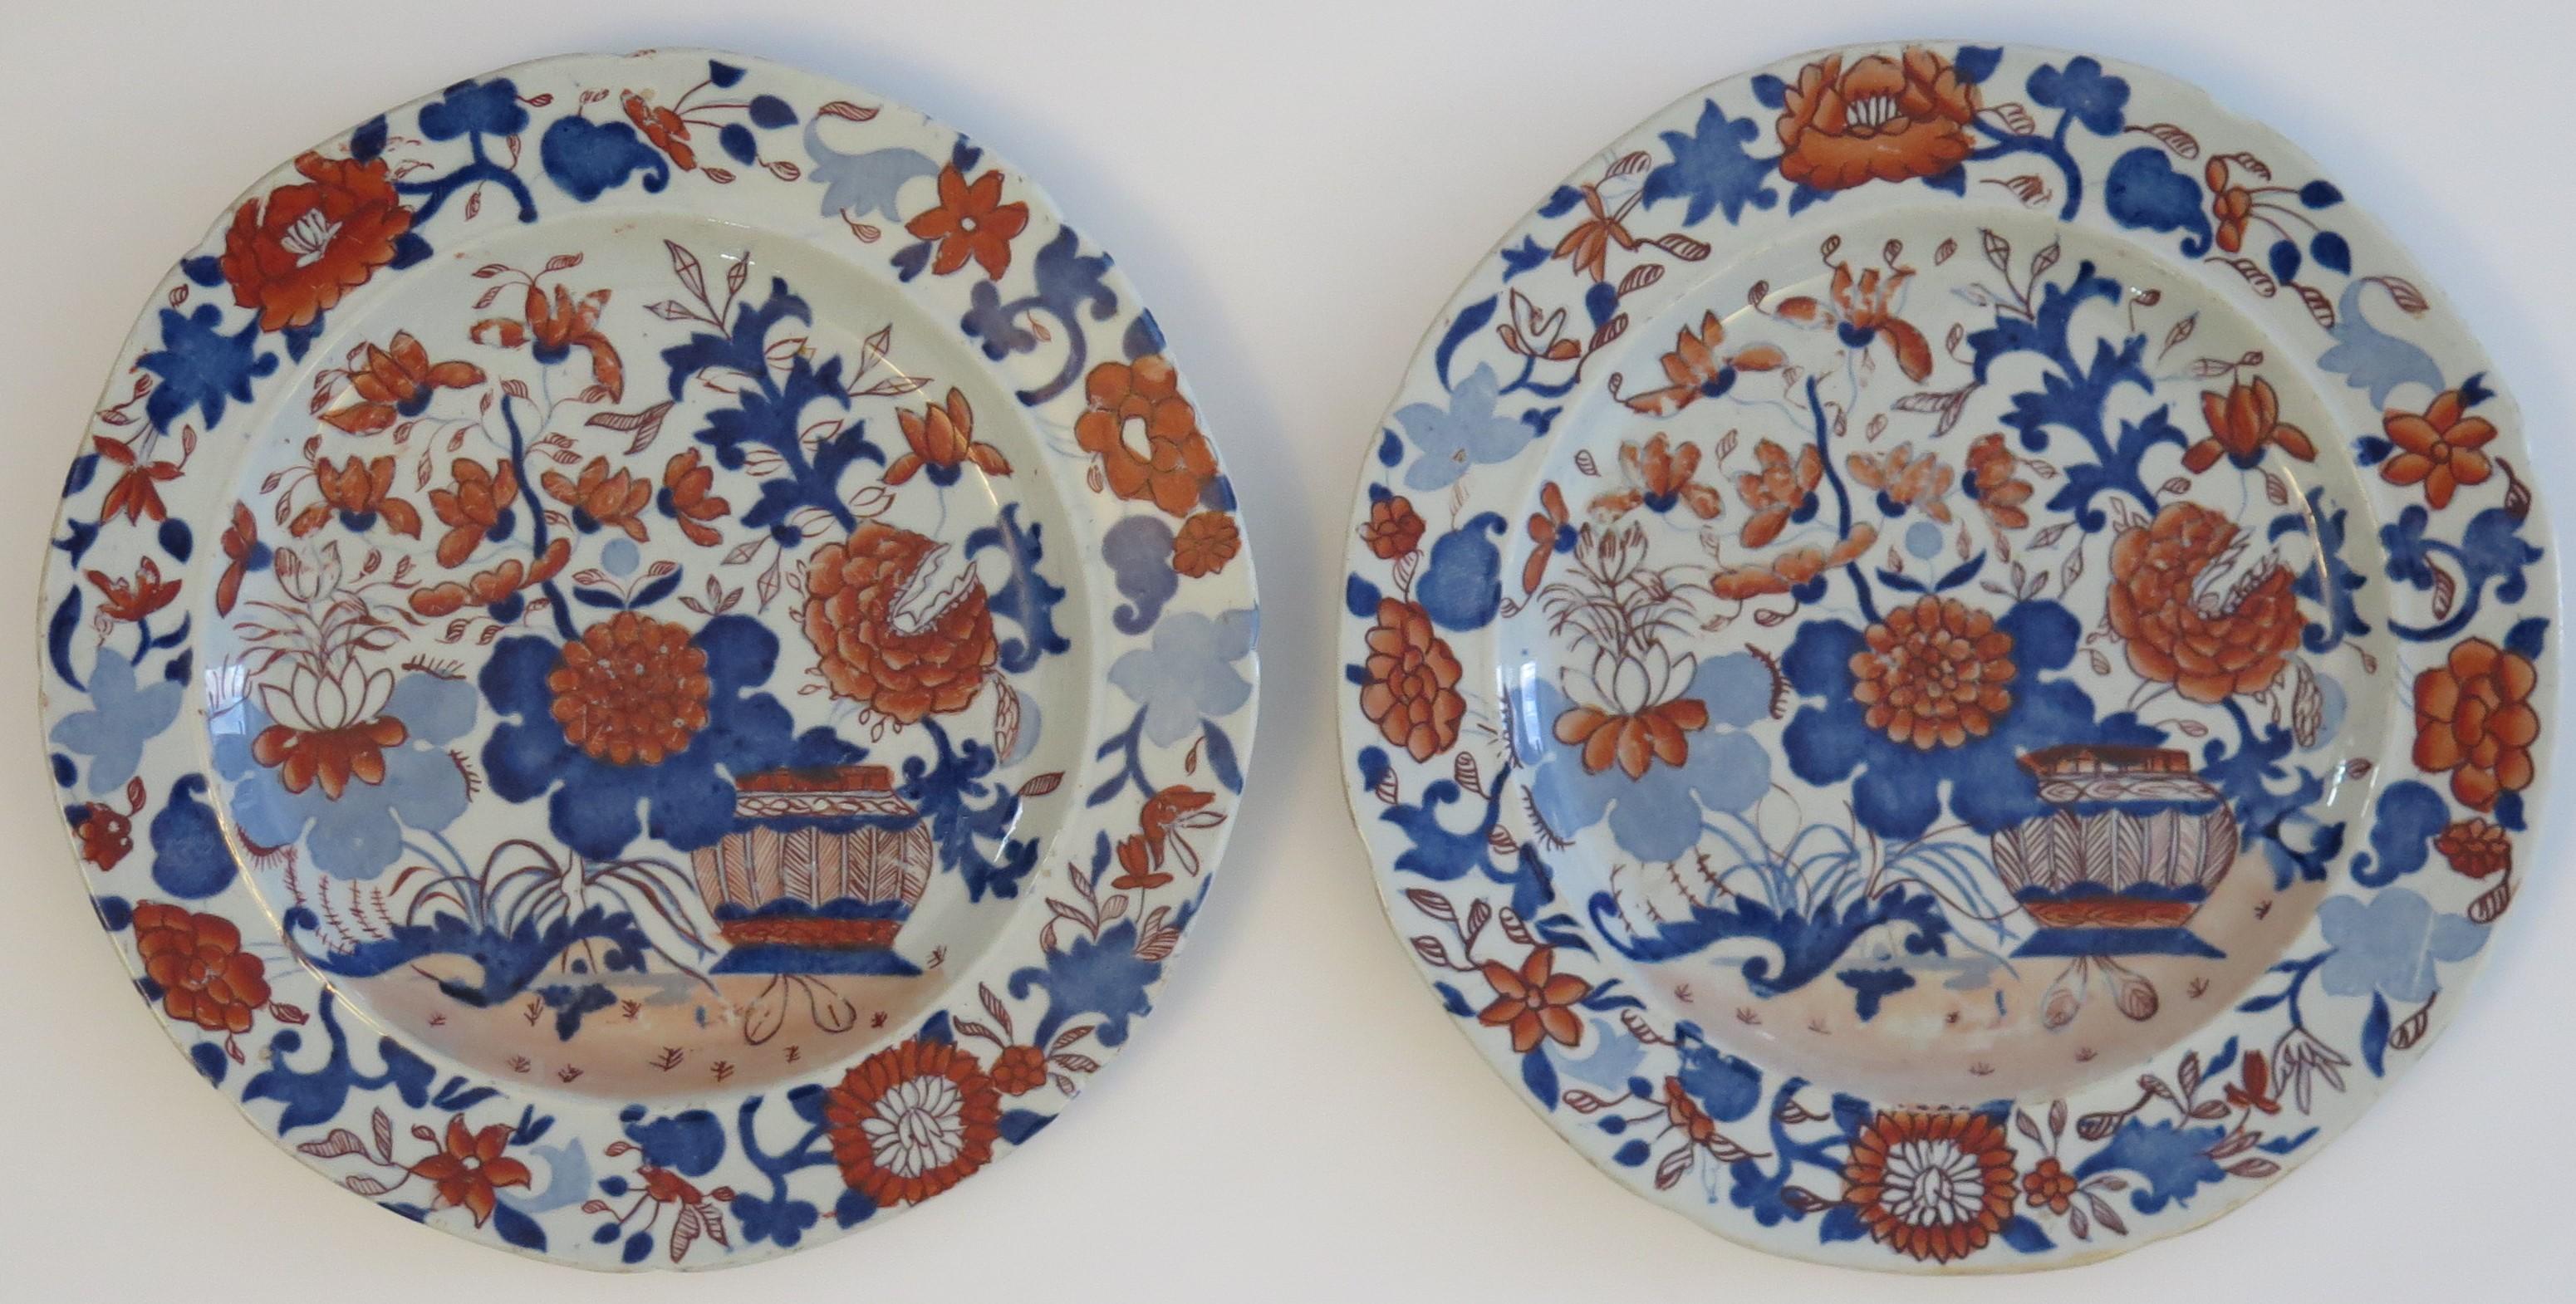 This is a very good early Mason's ironstone PAIR of Dinner Plates, hand painted in the very decorative Basket Japan pattern, produced by the Mason's factory at Lane Delph, Staffordshire, England, circa 1813-1820.

The plates are circular with a